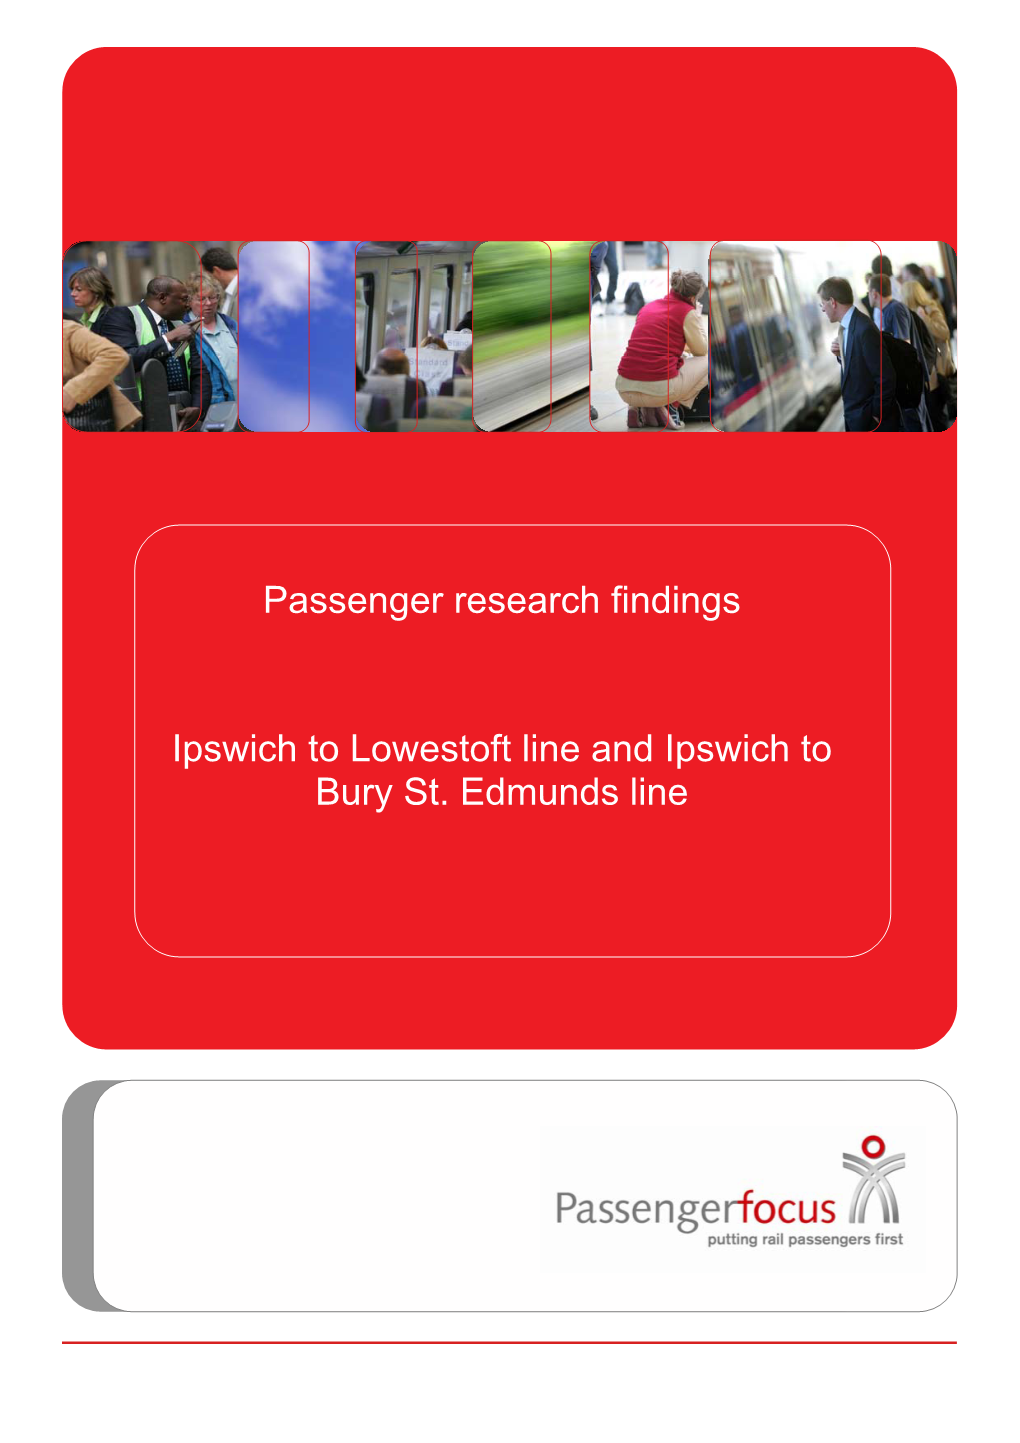 Passenger Research Findings: Ipswich to Lowestoft Line and Ipswich to Bury St